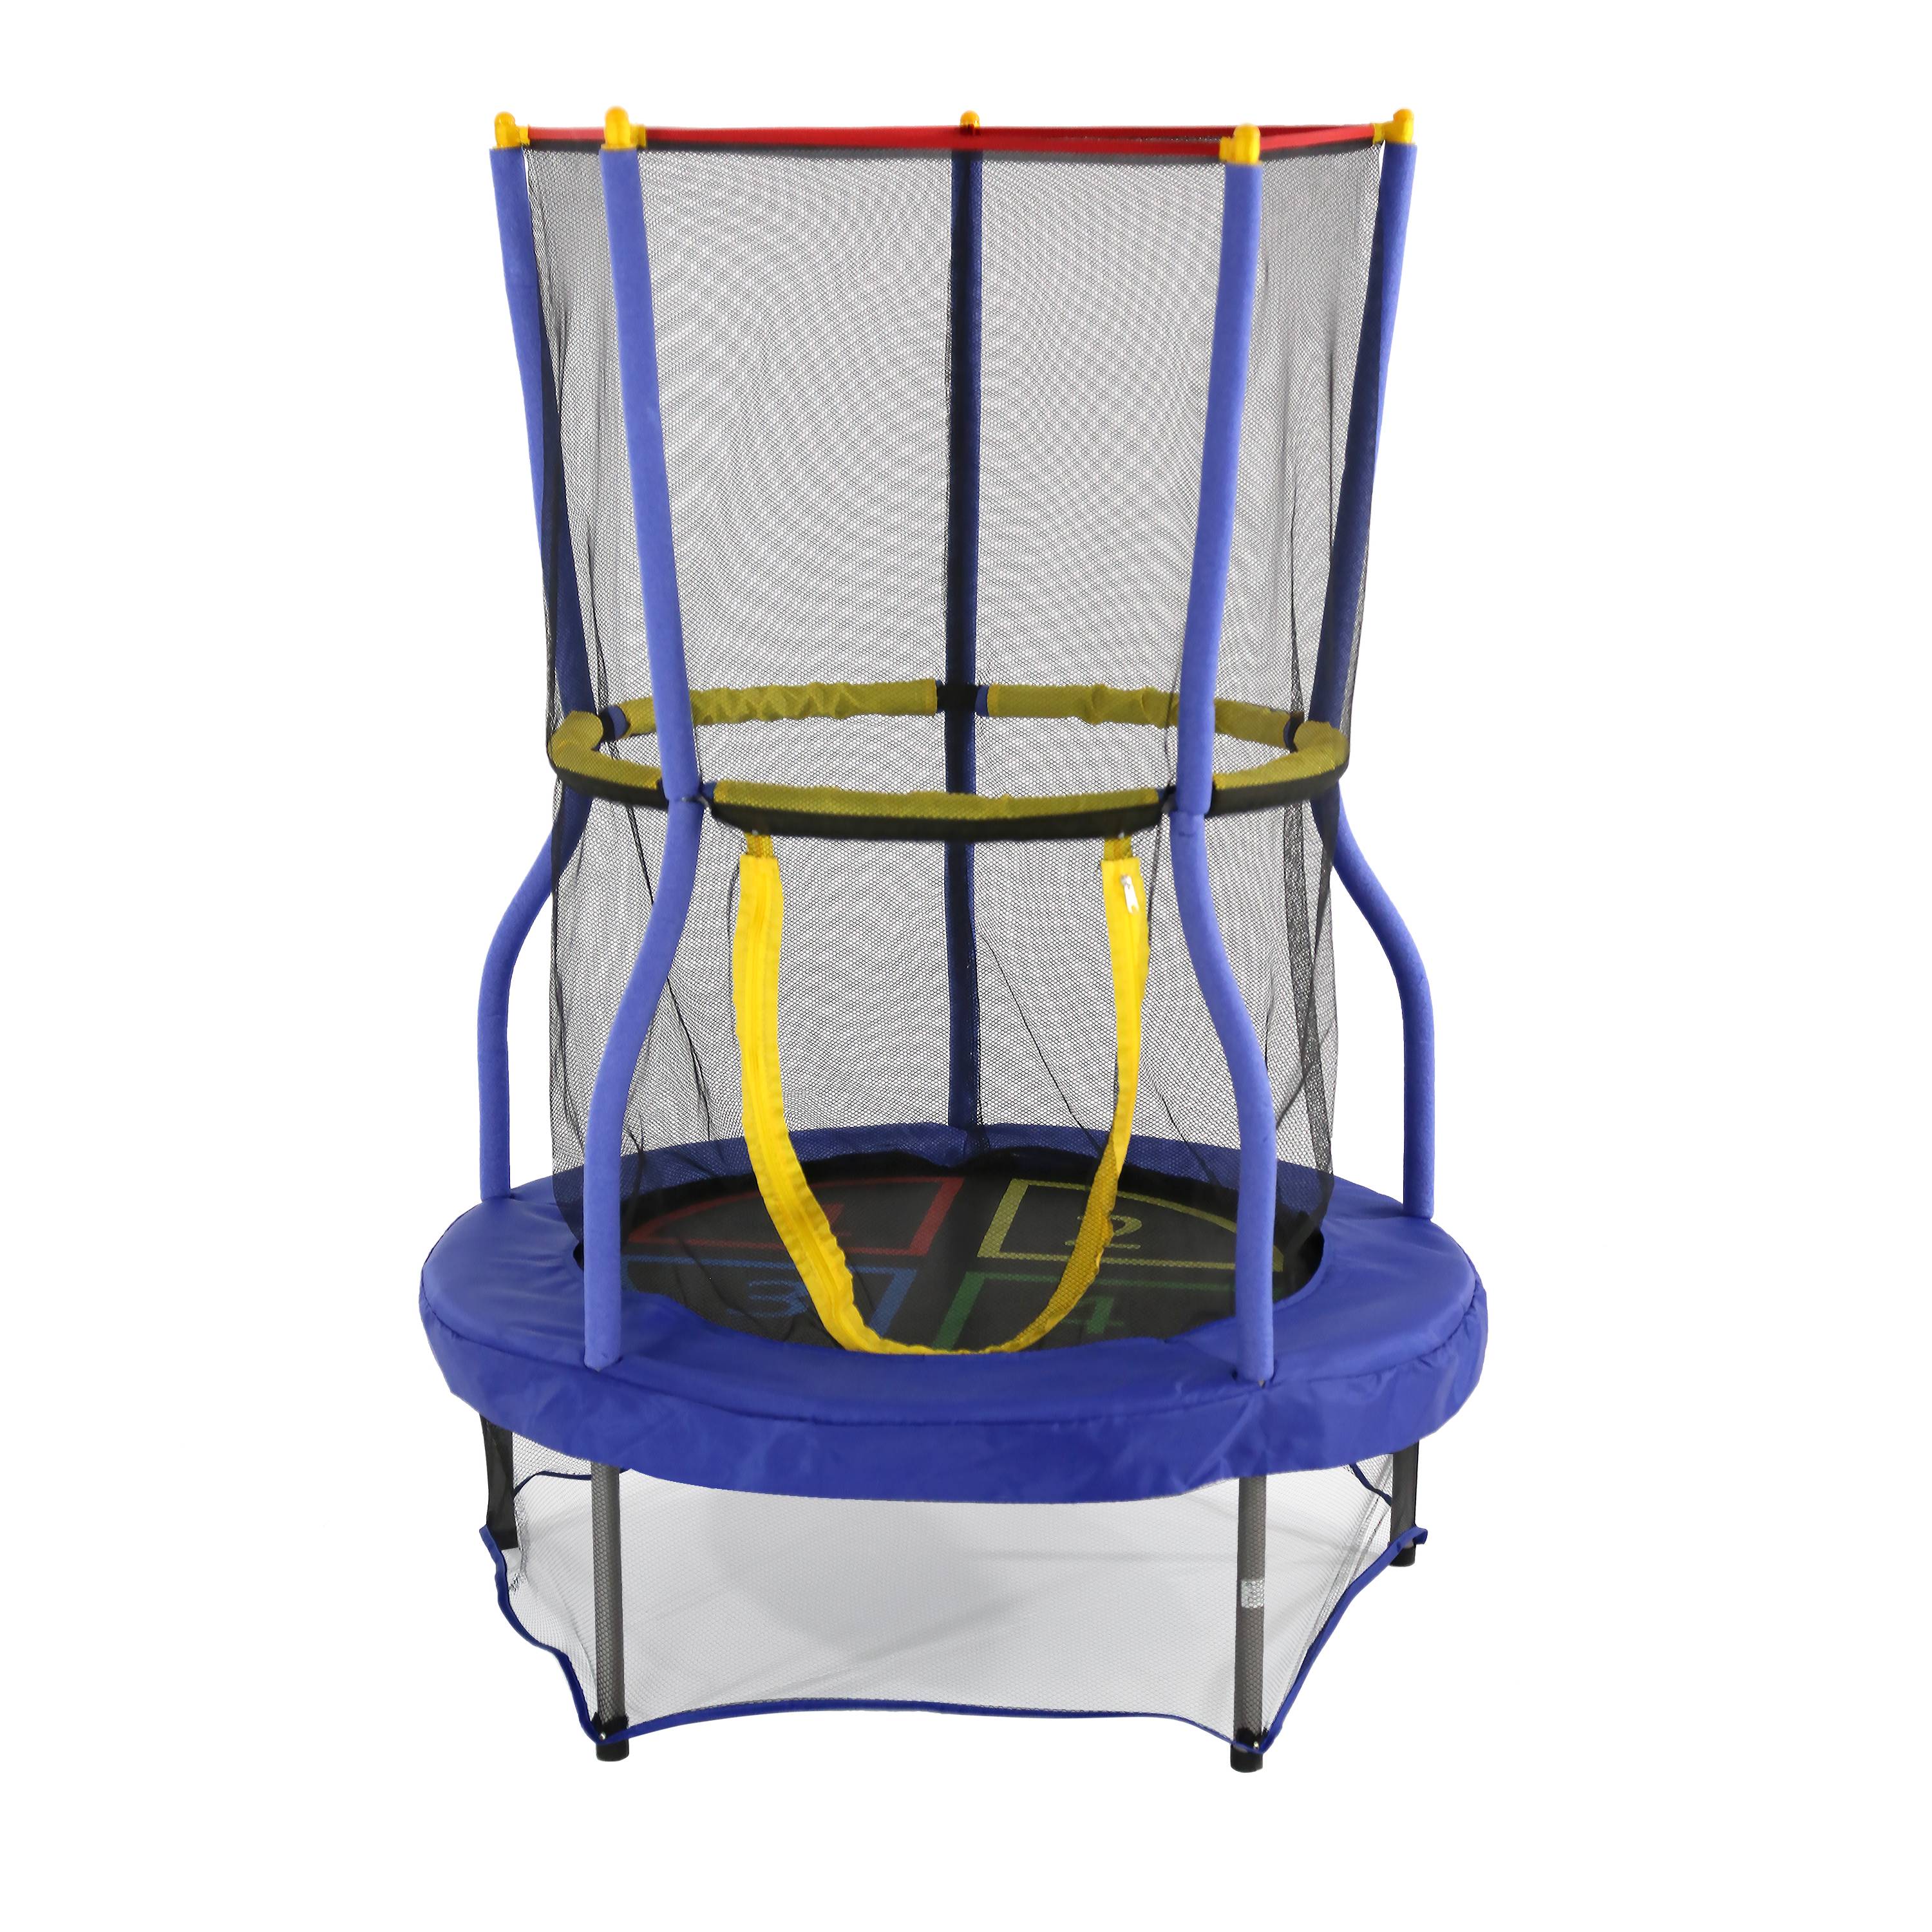 Skywalker Trampolines 40-Inch Bounce-N-Learn Trampoline, with Enclosure, Blue - image 1 of 10